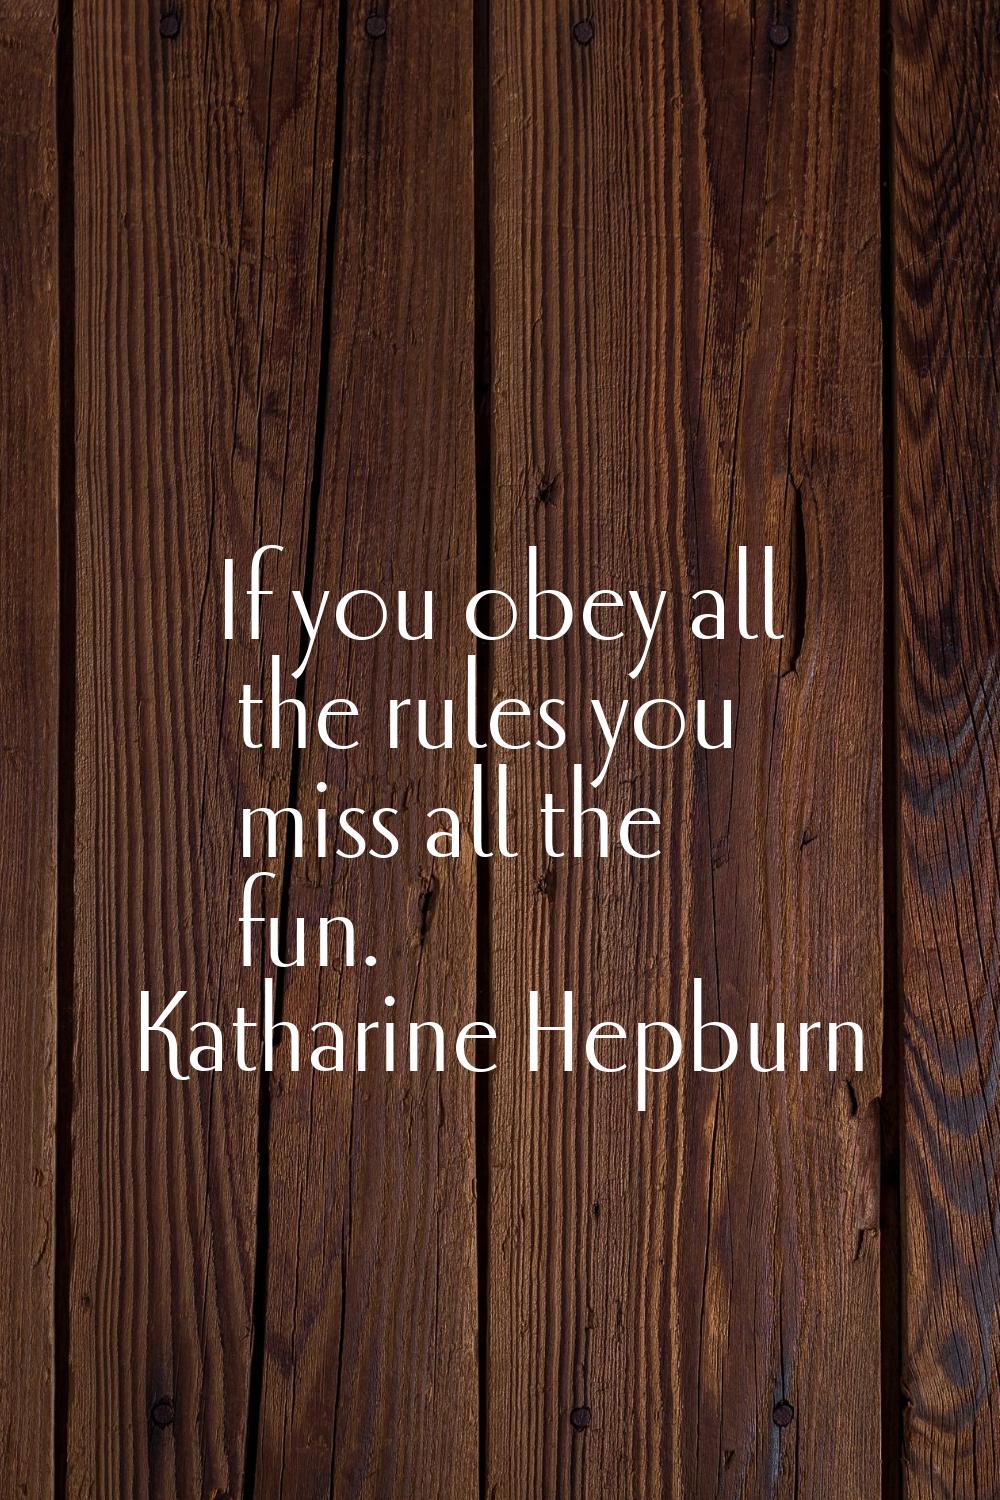 If you obey all the rules you miss all the fun.